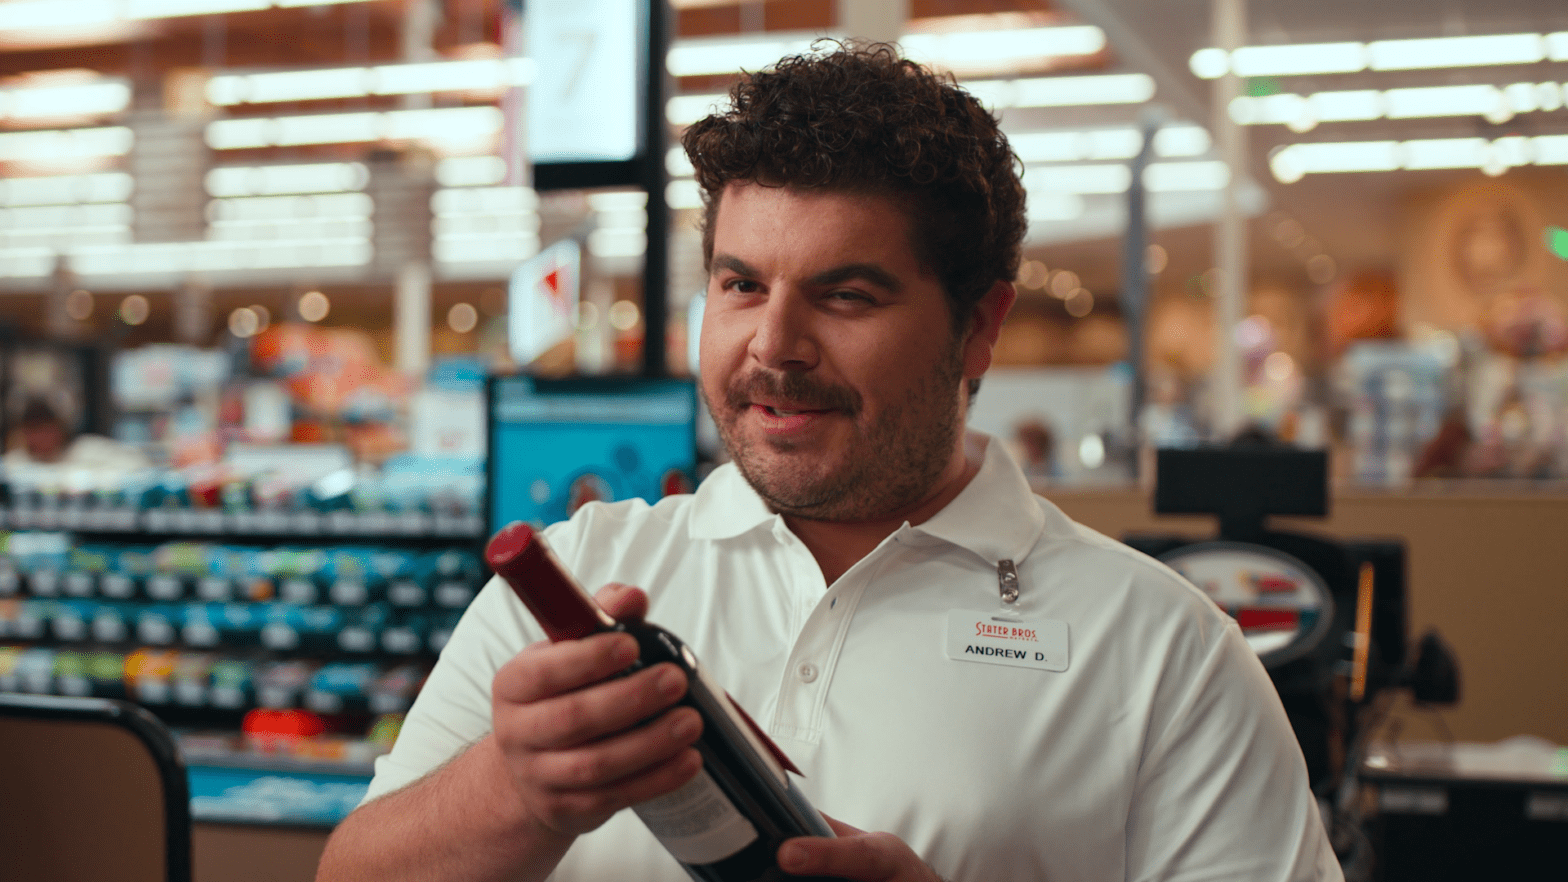 Store employee examining a bottle of sauce with a slight smile on his face, perfect for a date night grocery shopping list at Stater Bros.